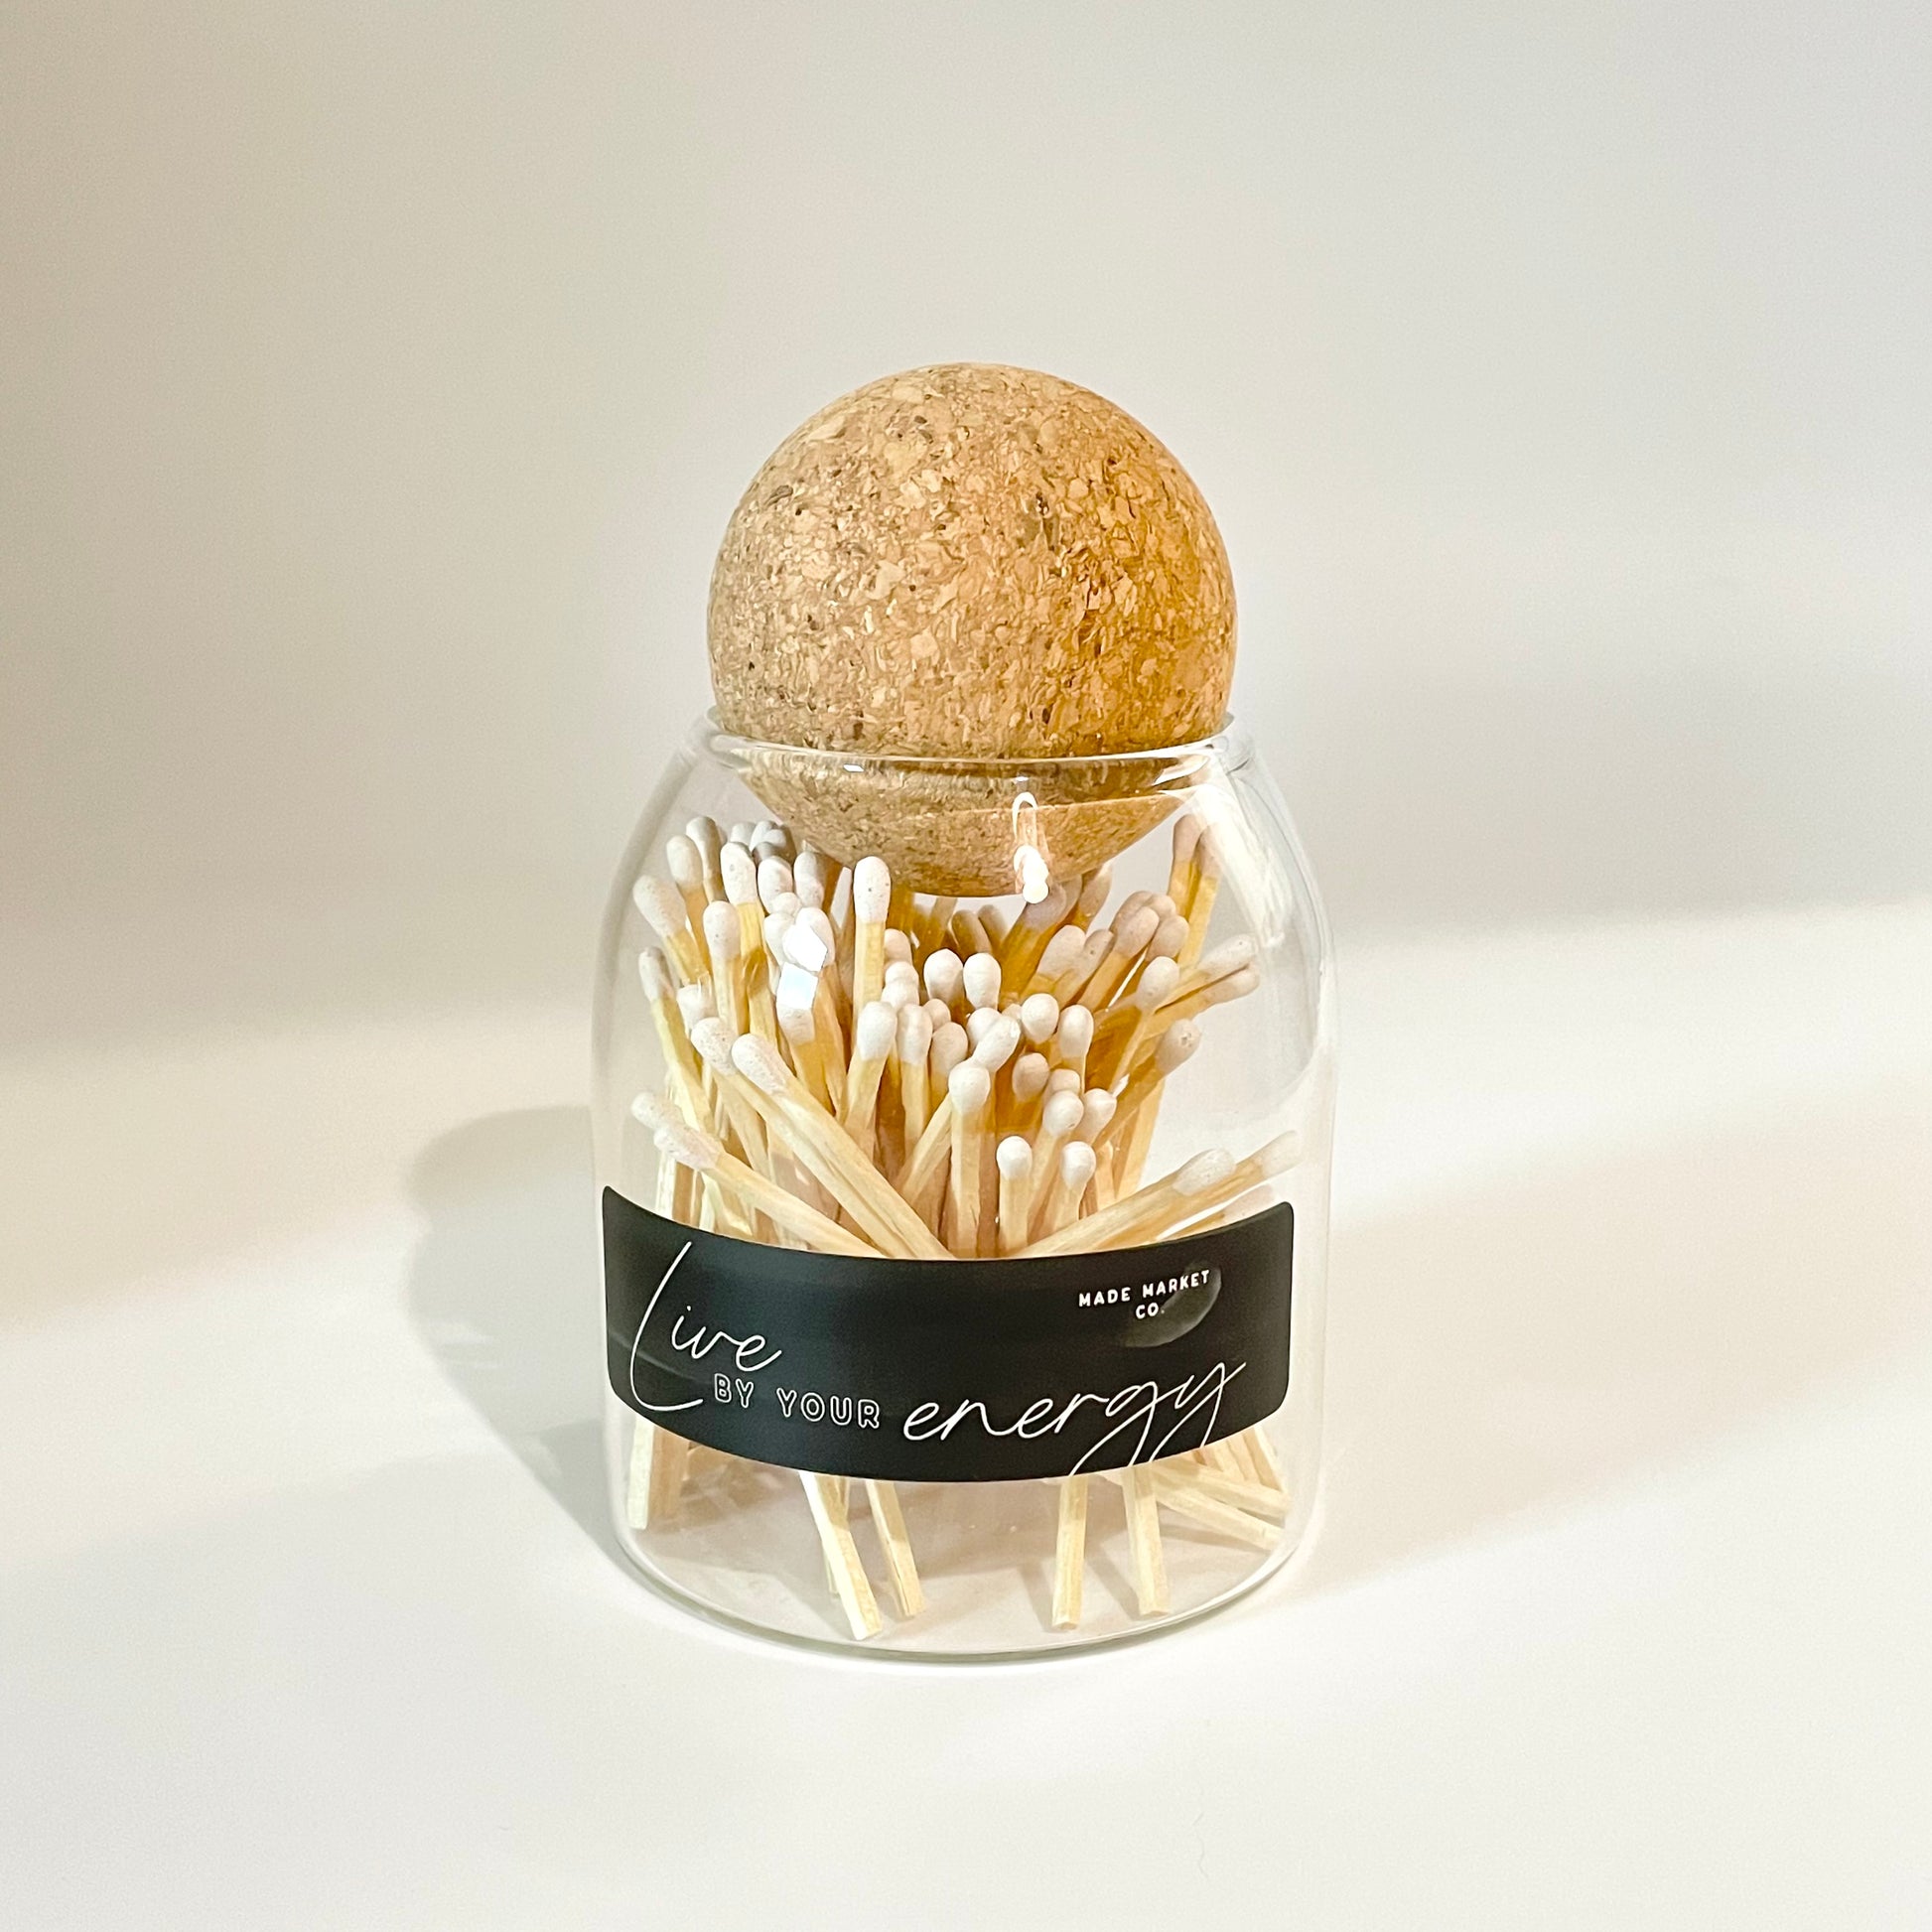 Apothecary long Matches in glass jar with cork ball stopper and striker for candles